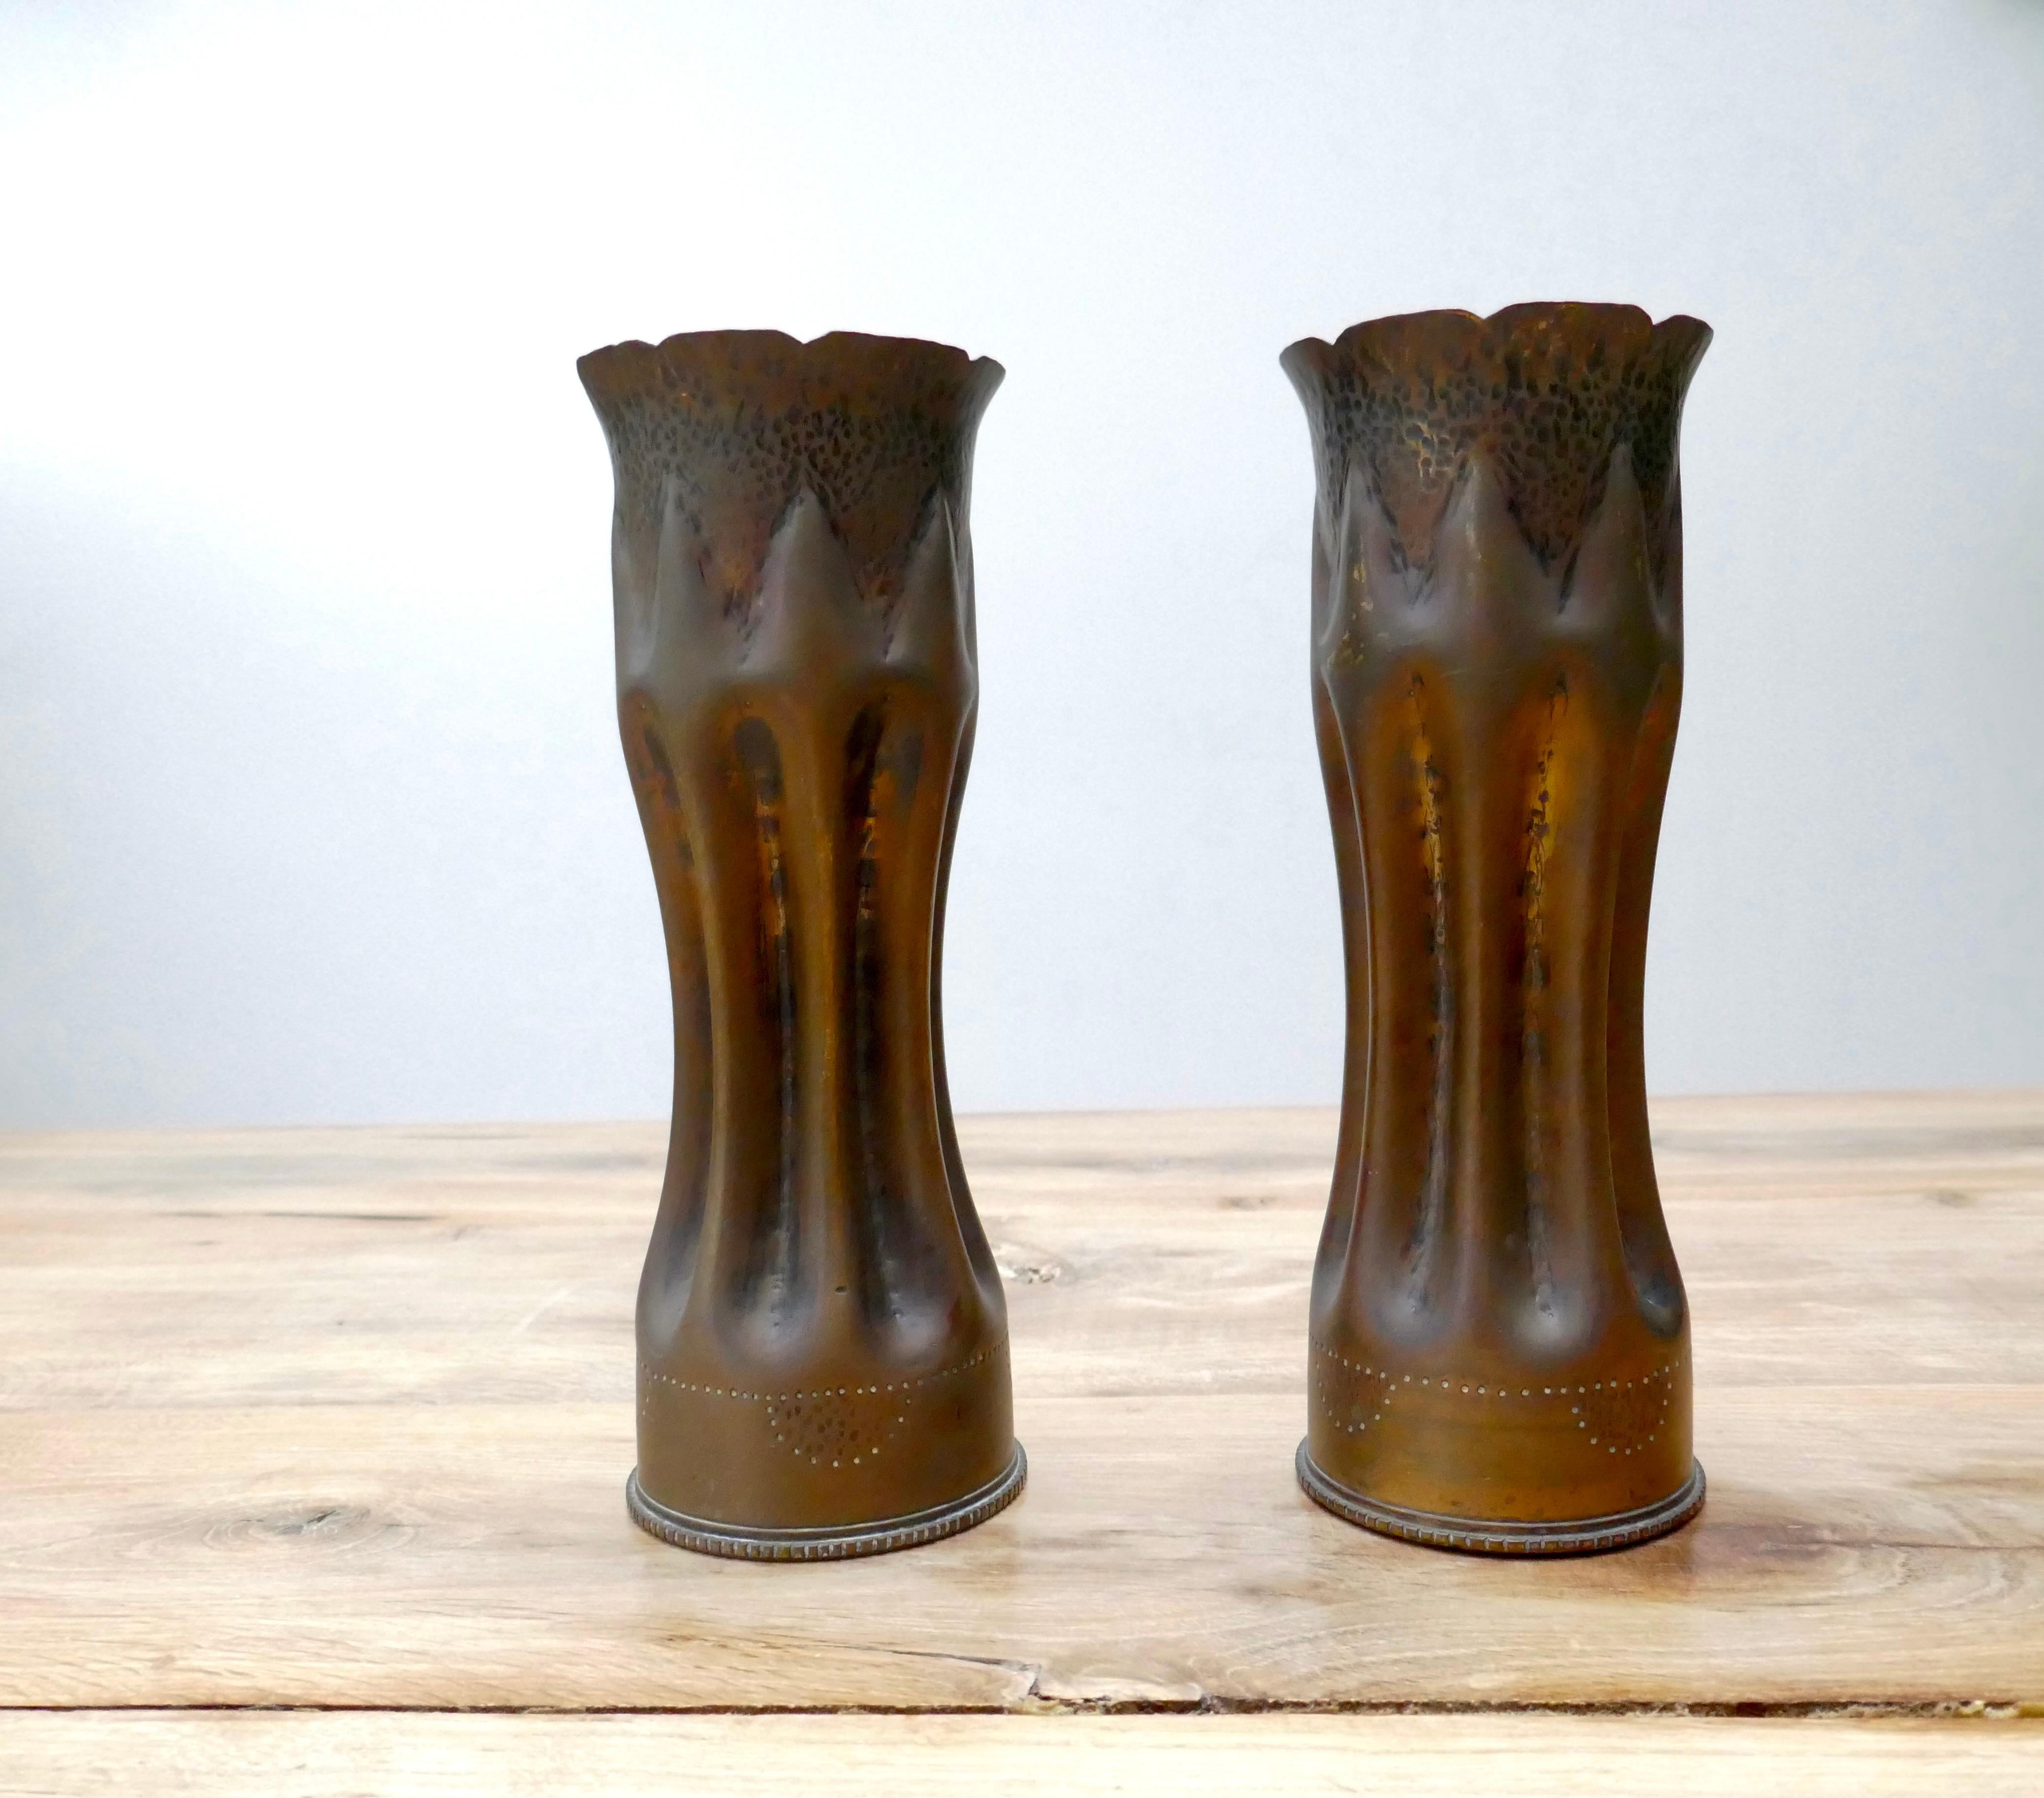 Pair of French Trench Art vases / shell casings from the World War I vases.

Trench art objects are holders of soldiers' memories and reminders of the conflict they faced. Made out of recycled war refuse such as shell casings, spent bullets or